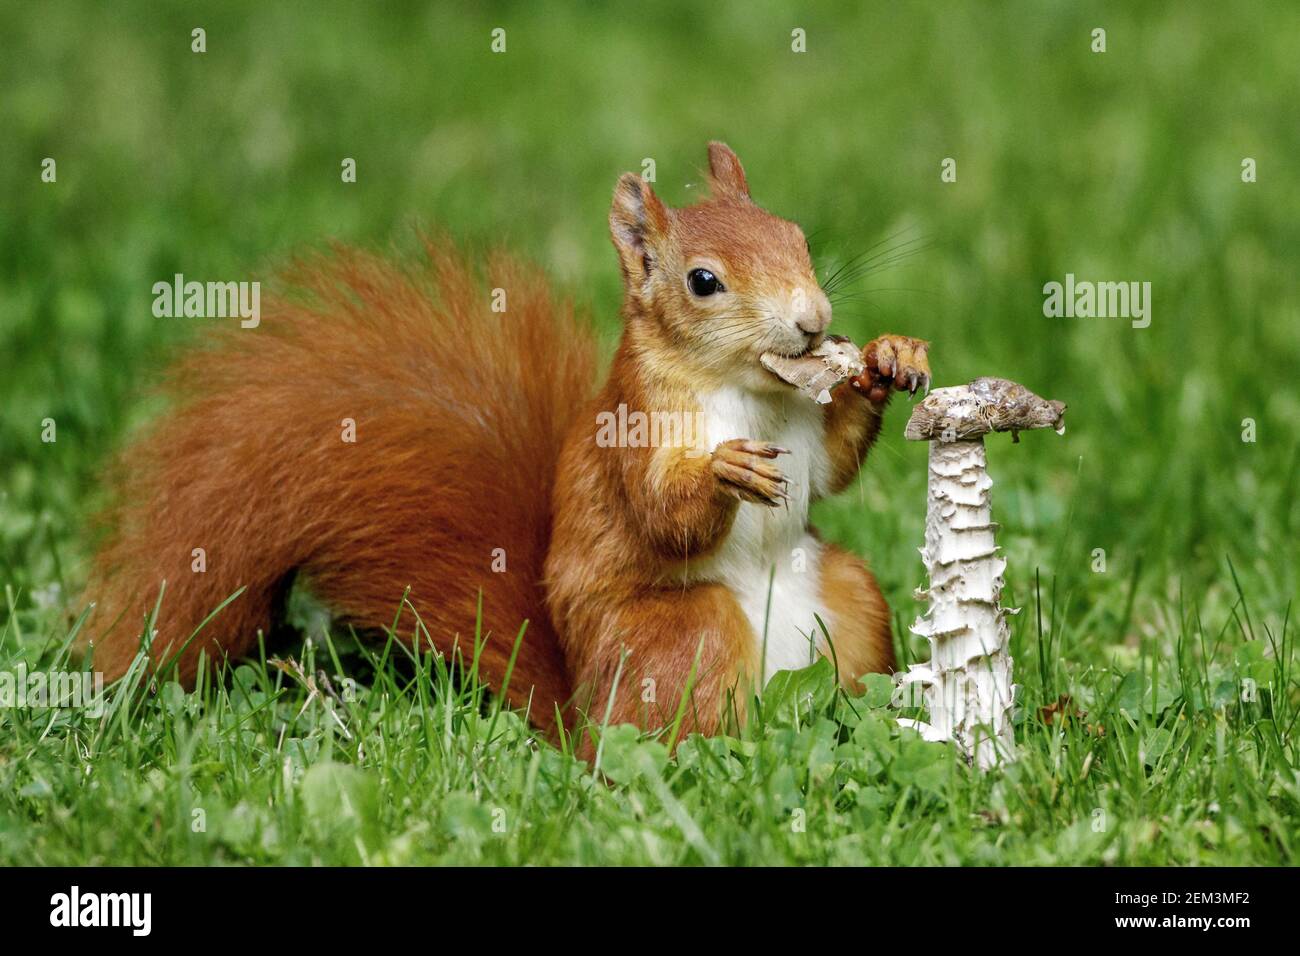 European red squirrel, Eurasian red squirrel (Sciurus vulgaris), sits in a meadow and eating a mushroom, Germany, Baden-Wuerttemberg Stock Photo